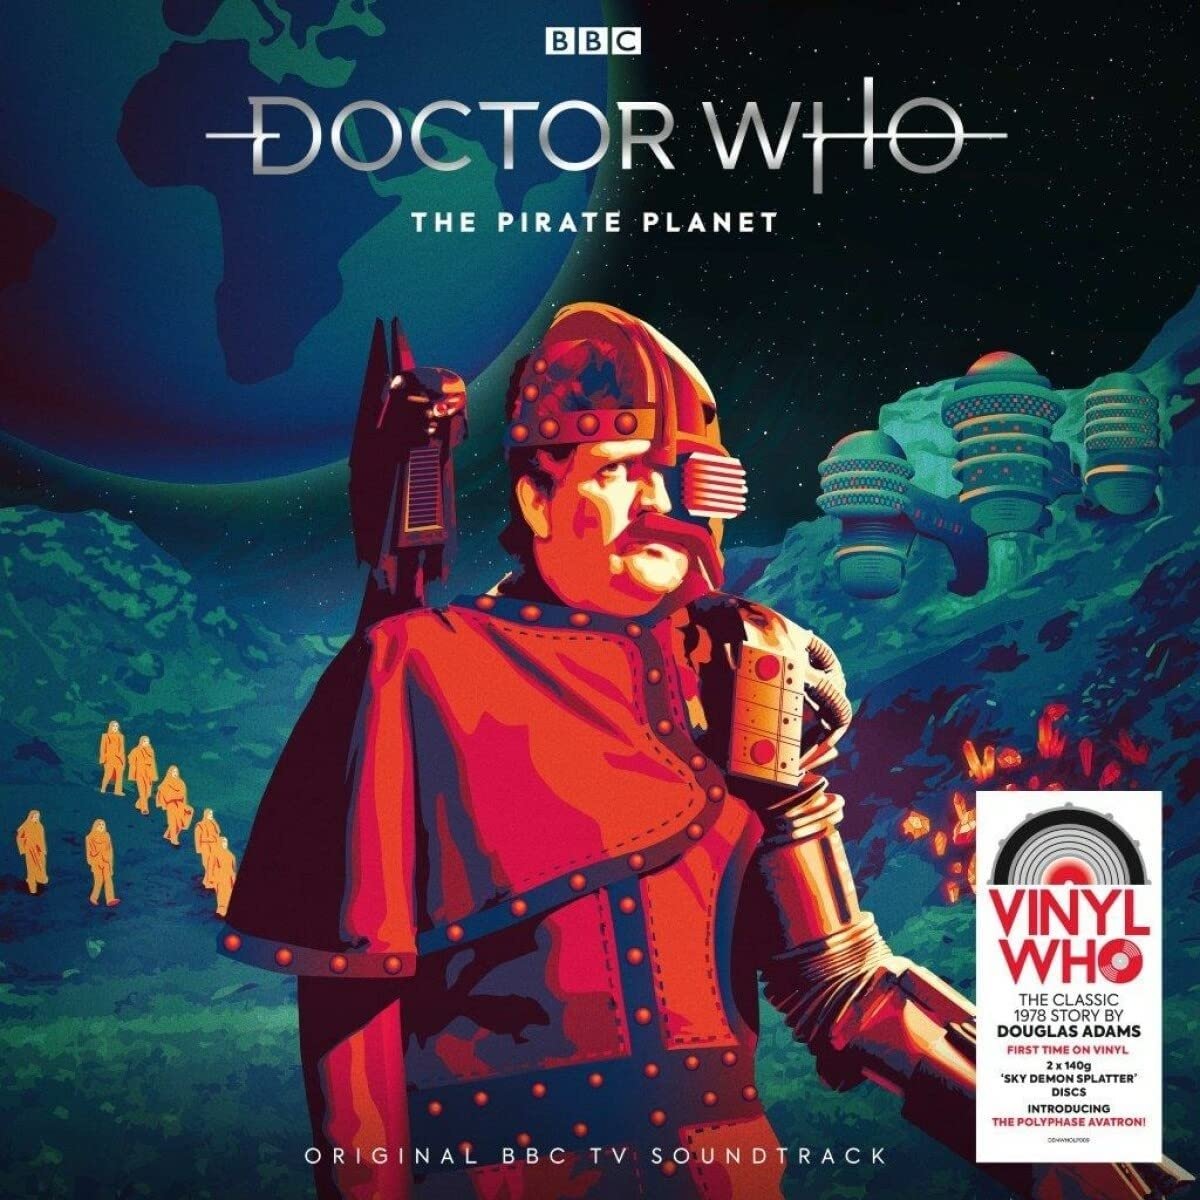 Coming Soon from the Vinyl Who Collection: The Pirate Planet from Demon Records